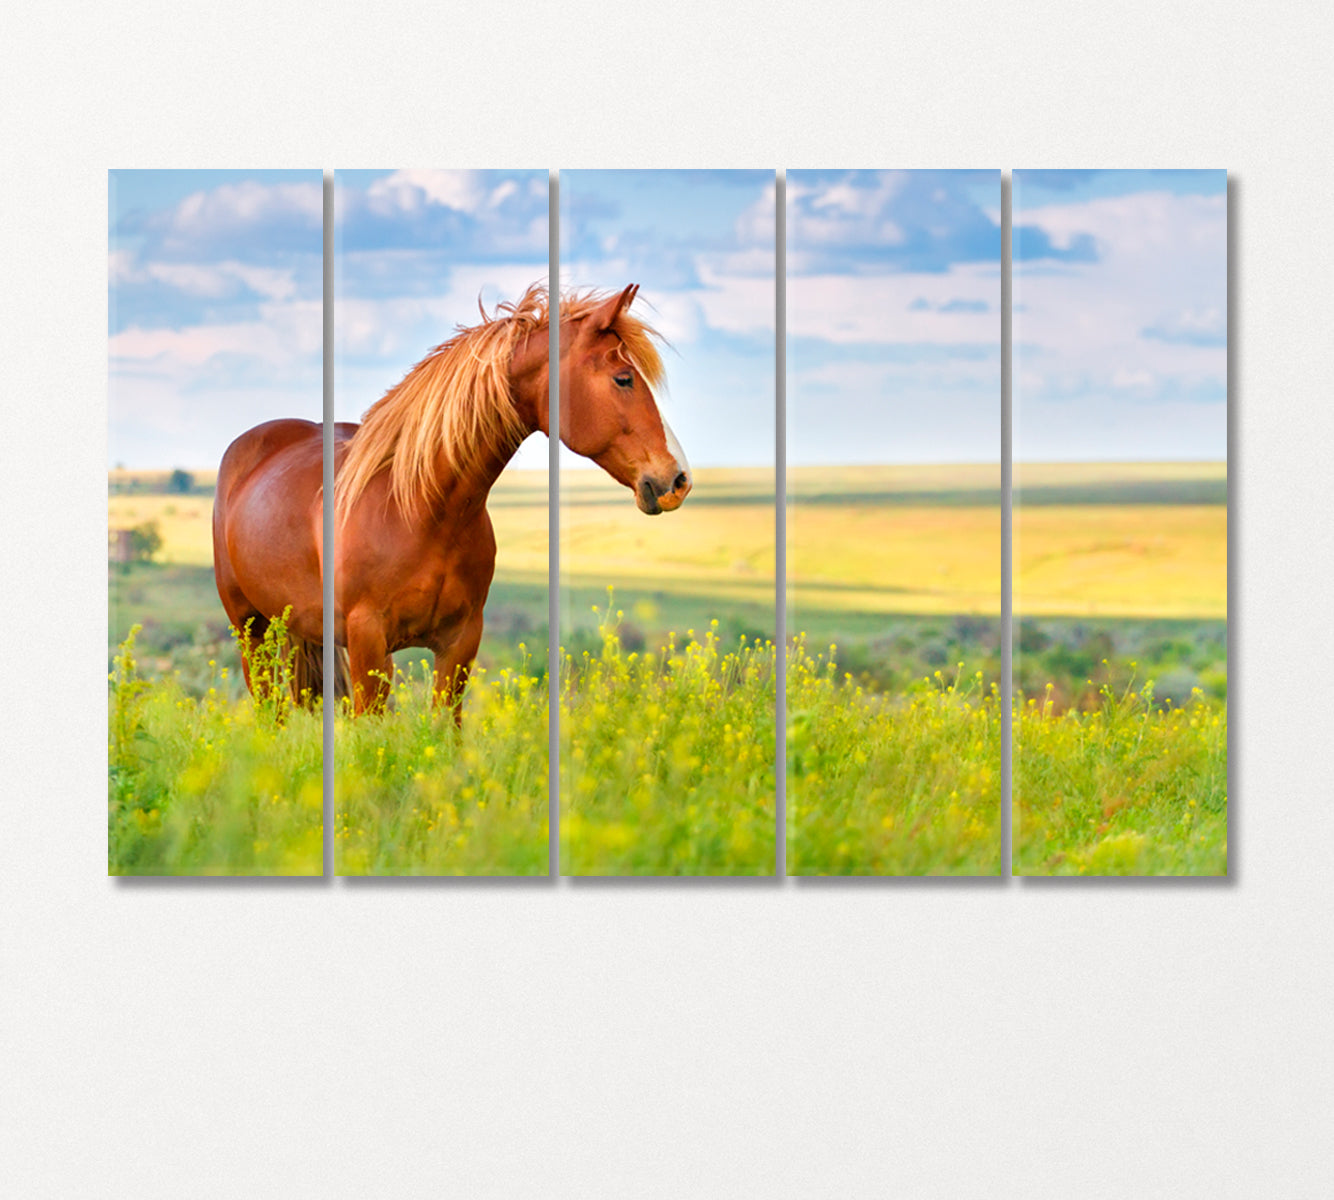 Red Horse in Flower Field Canvas Print-Canvas Print-CetArt-5 Panels-36x24 inches-CetArt